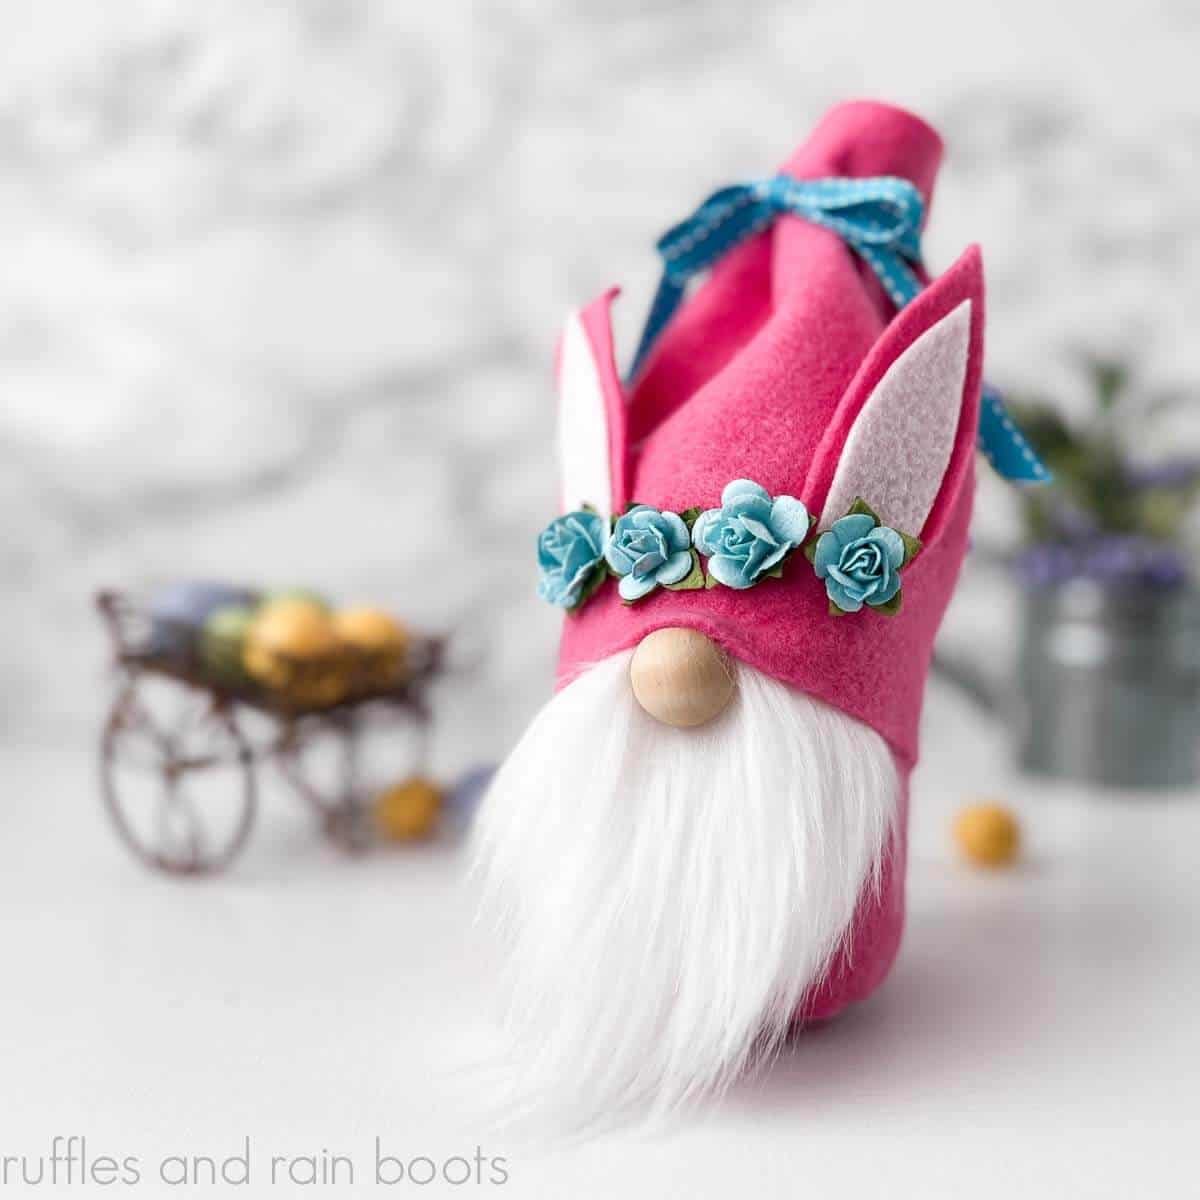 Square close up image of a gnome treat container made with pink felt, blue ribbon, blue flowers, and a white beard.